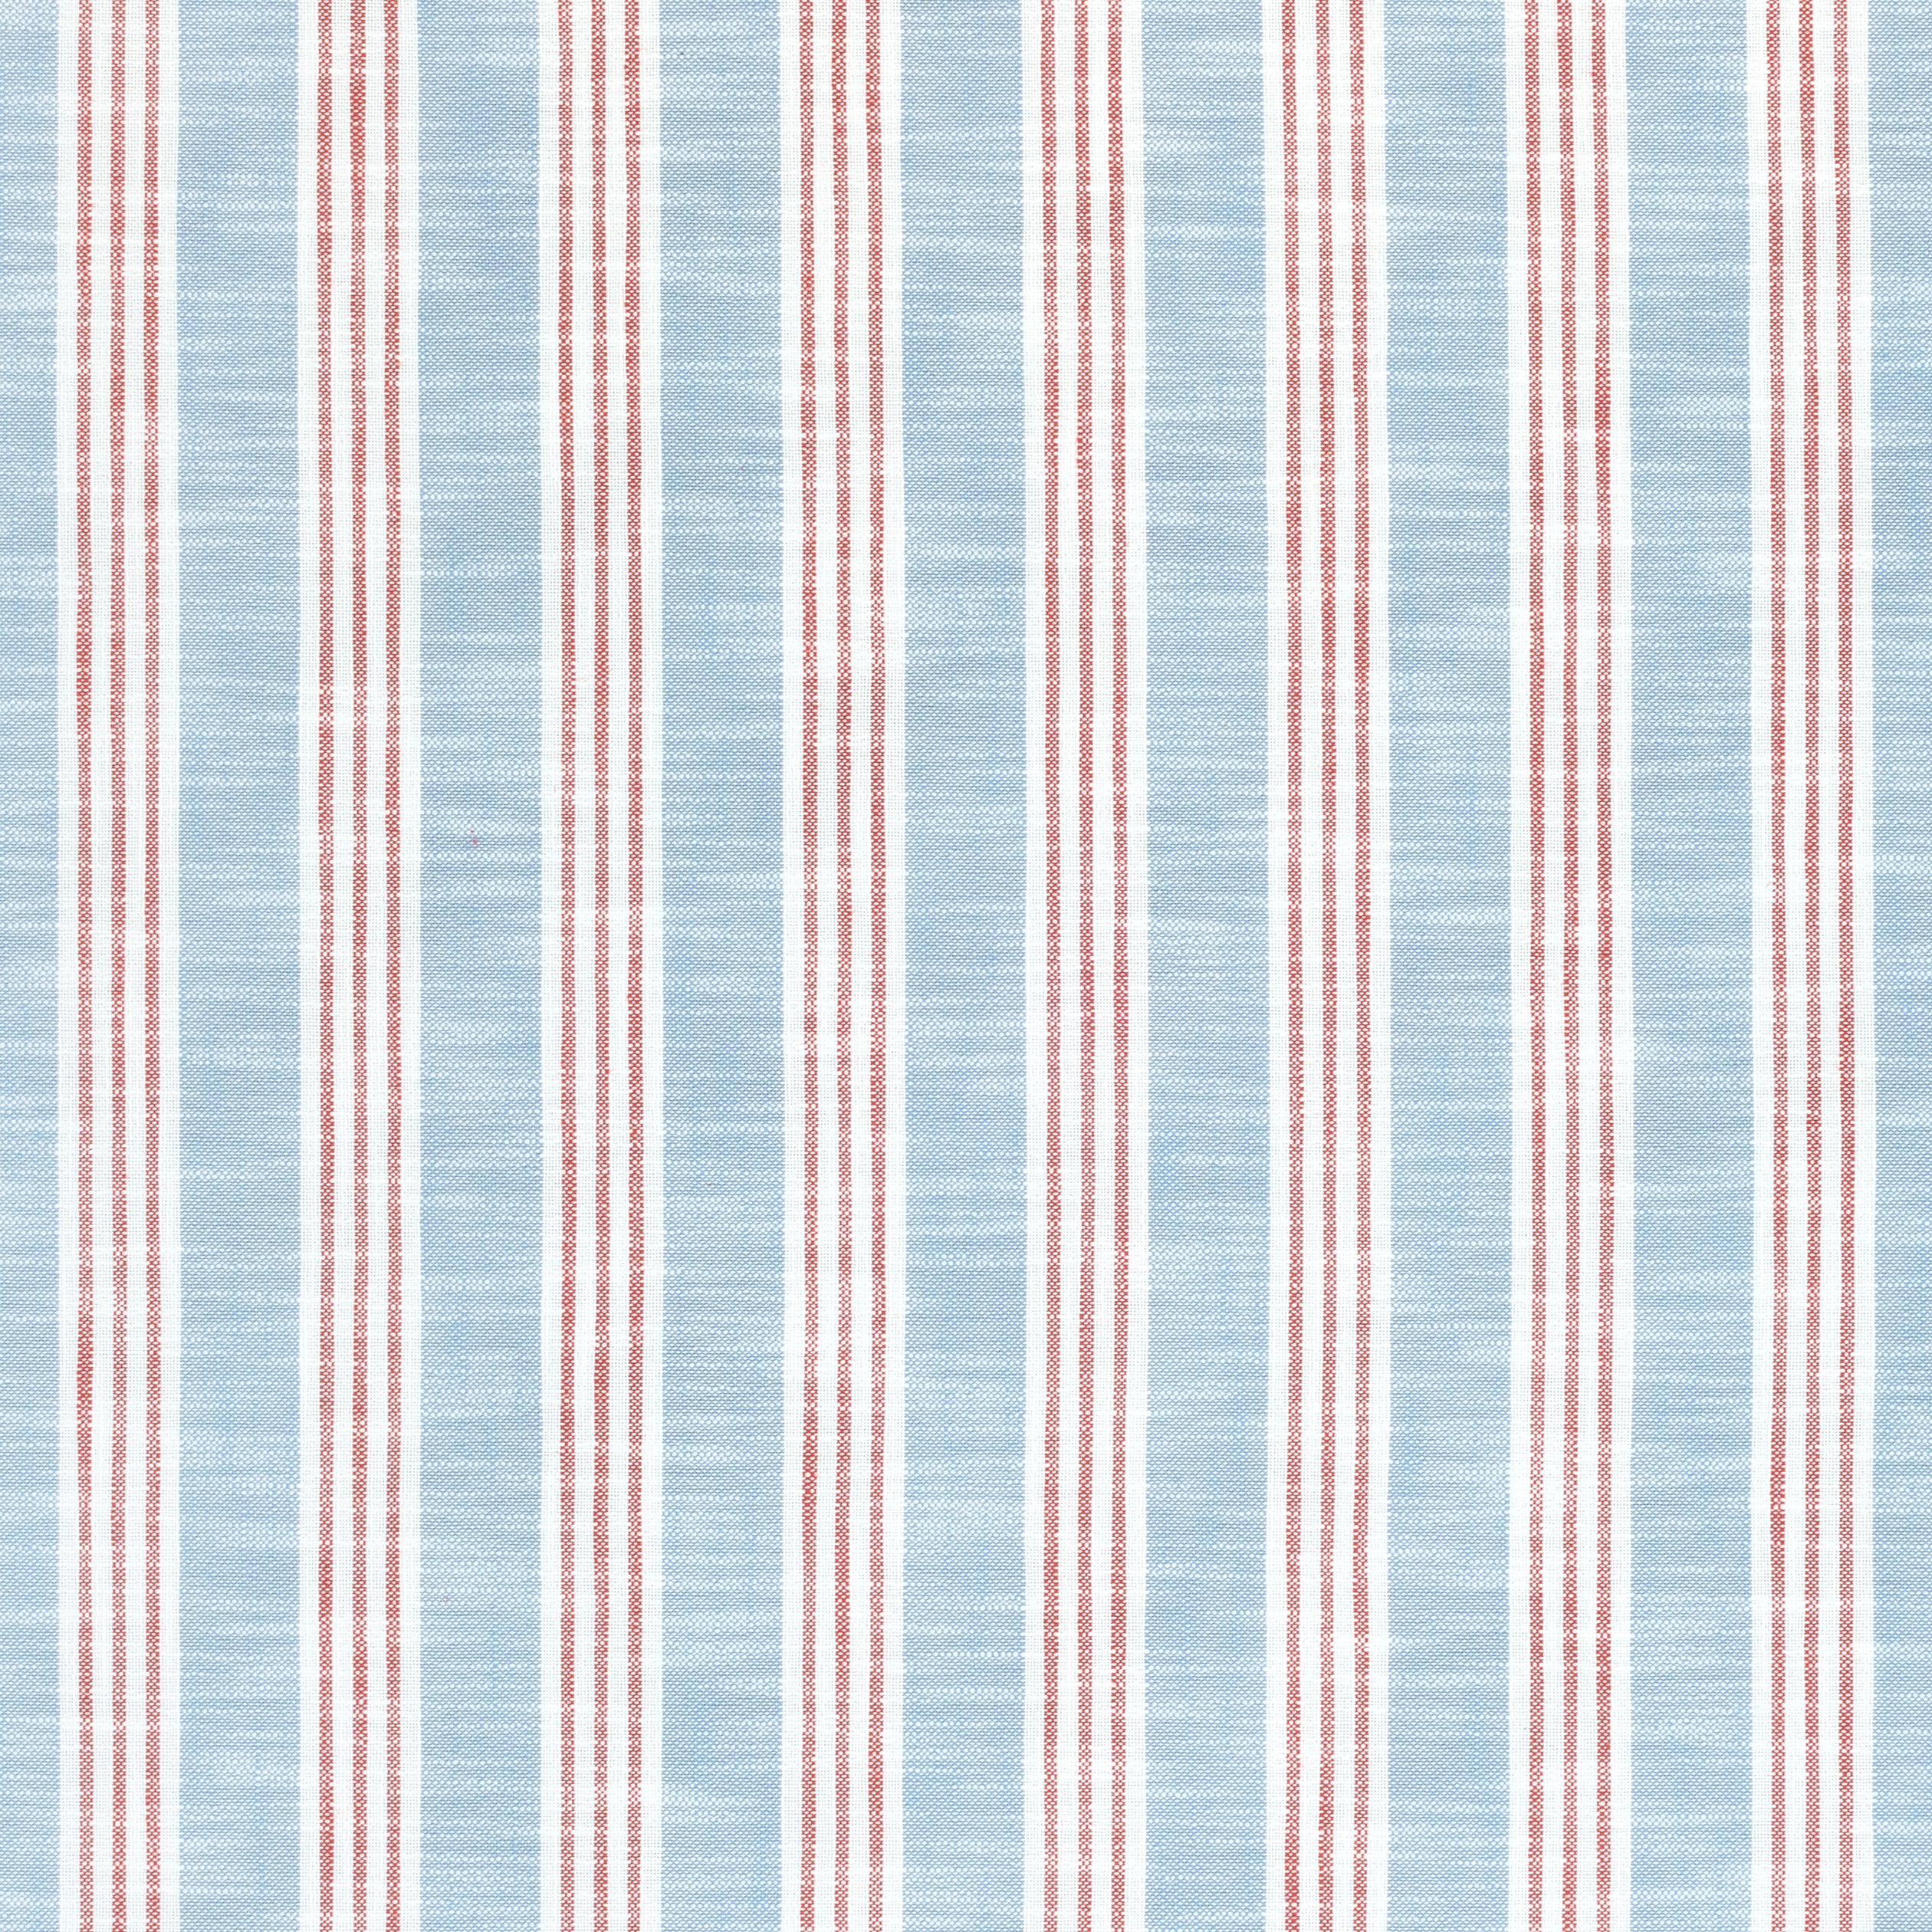 Southport Stripe fabric in sky and red color - pattern number W73489 - by Thibaut in the Landmark collection